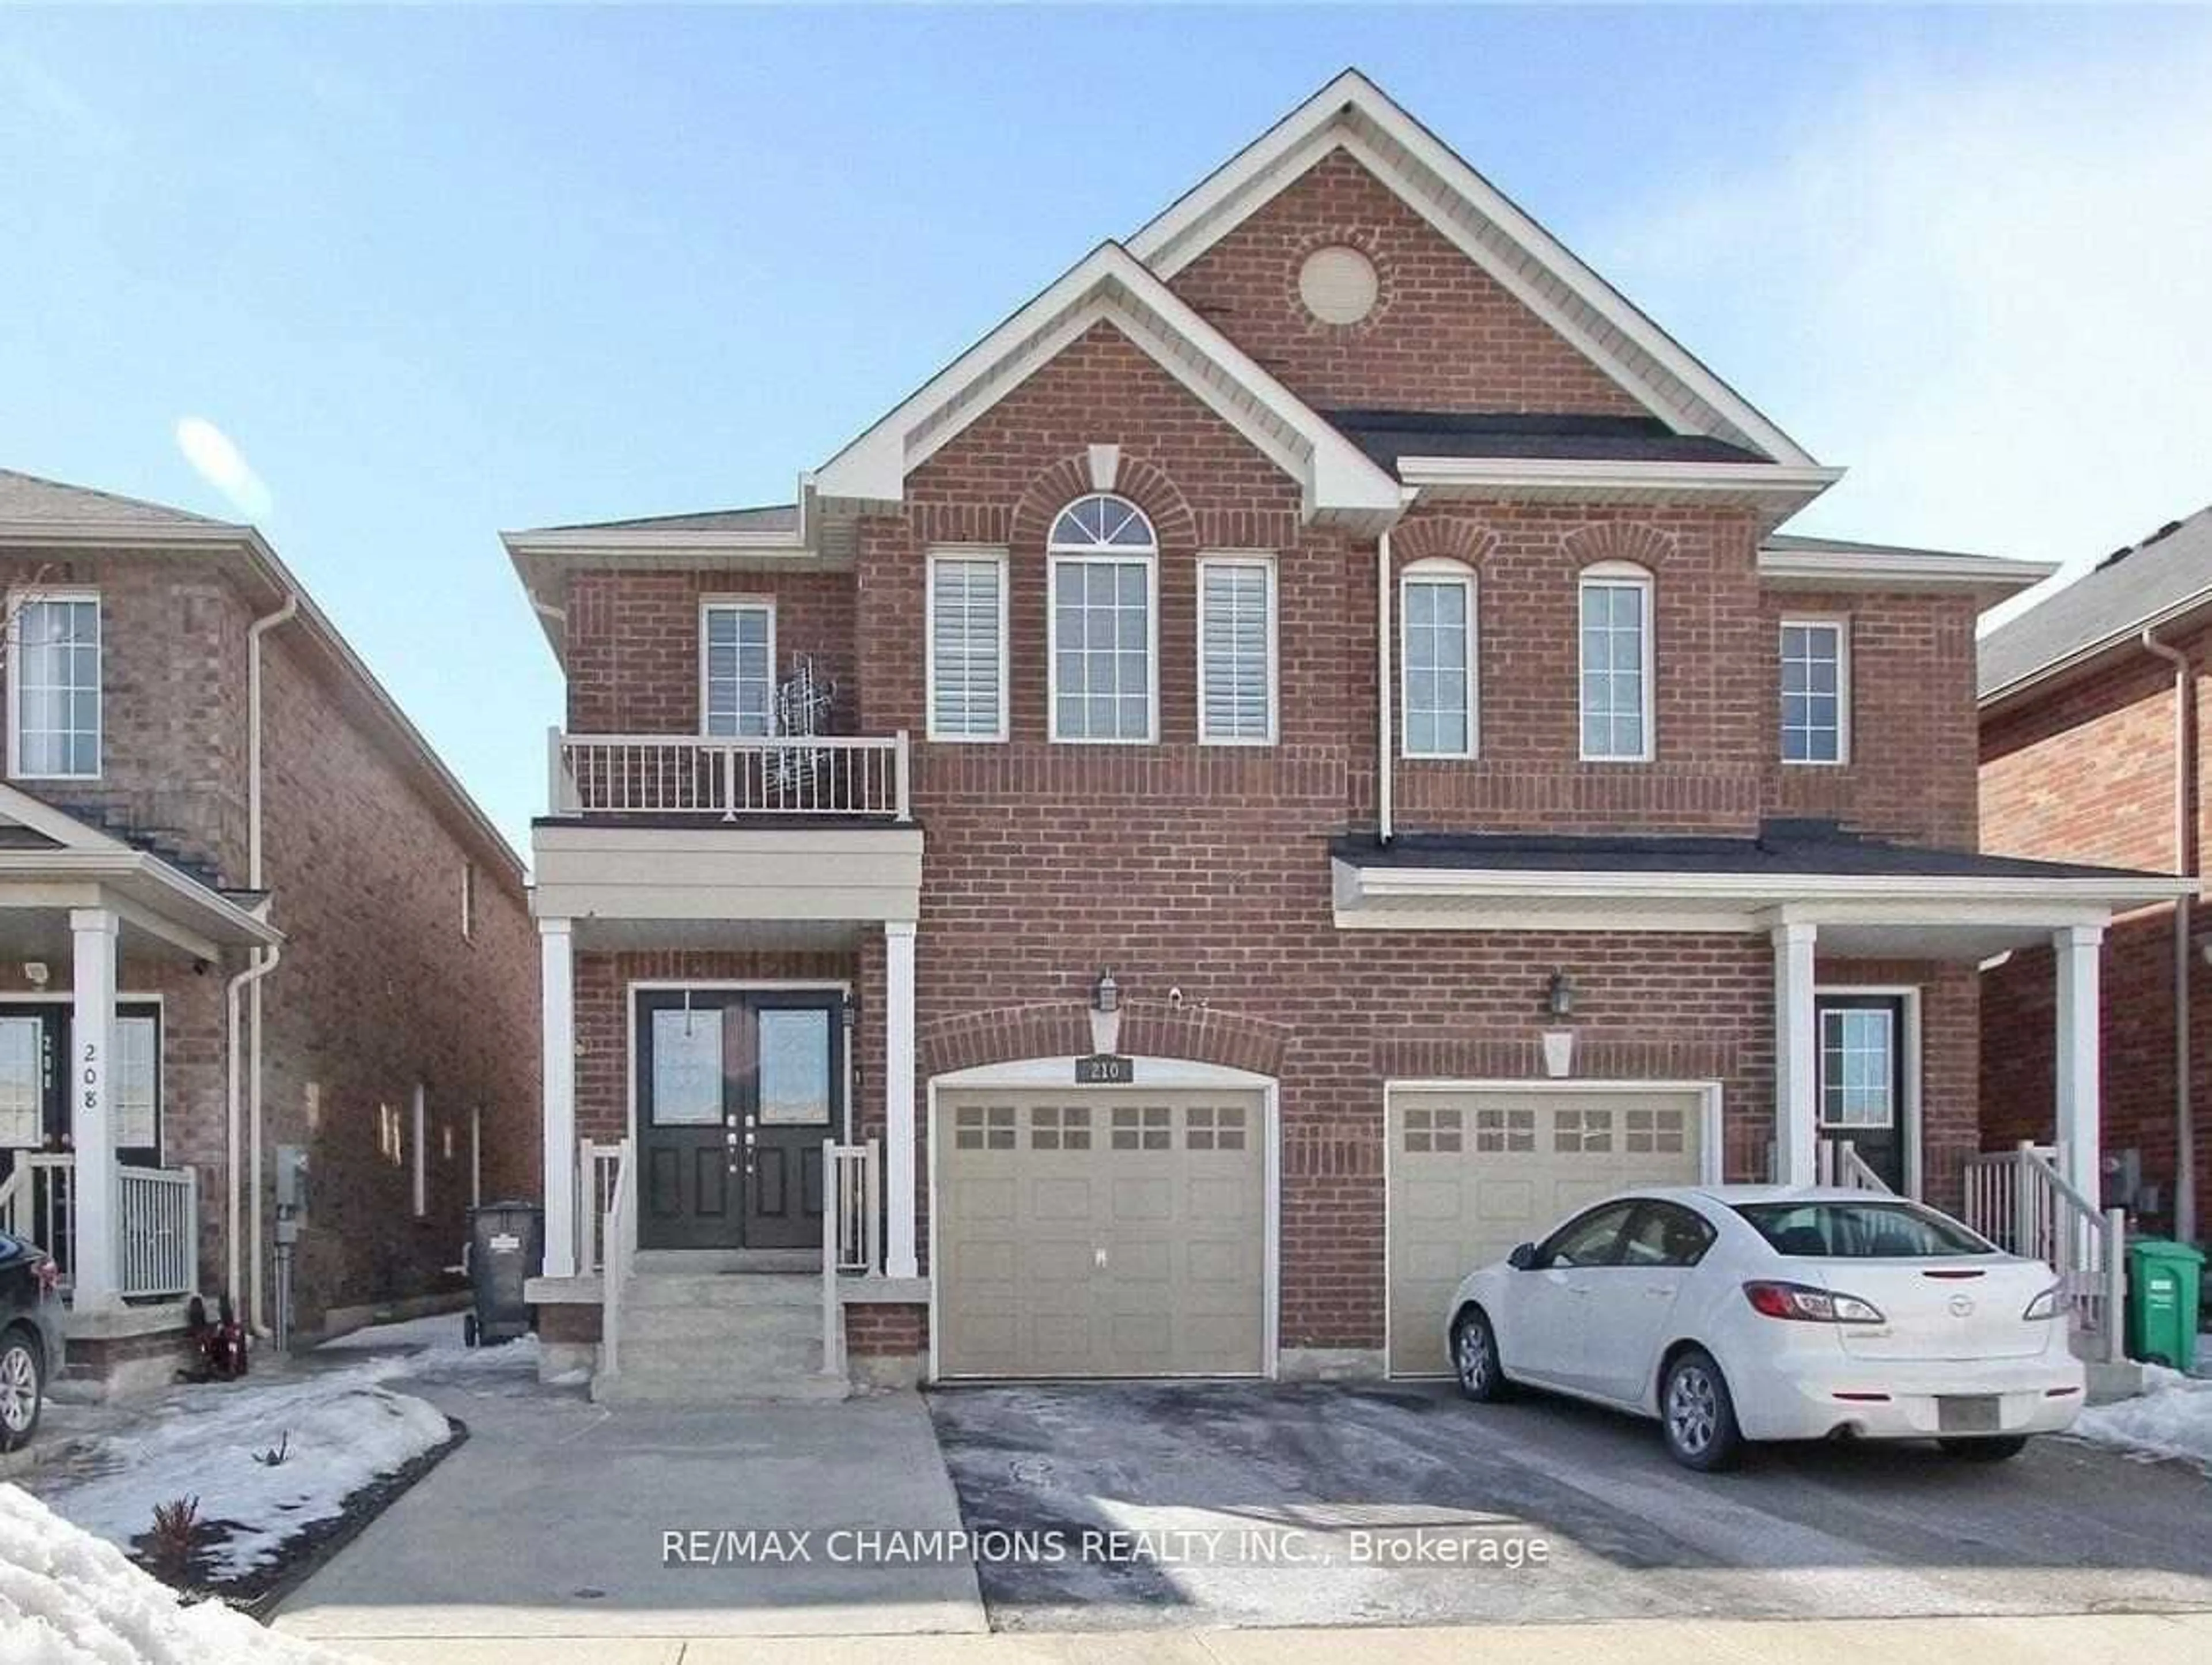 Home with brick exterior material for 210 Brussels Ave, Brampton Ontario L6Z 0G1